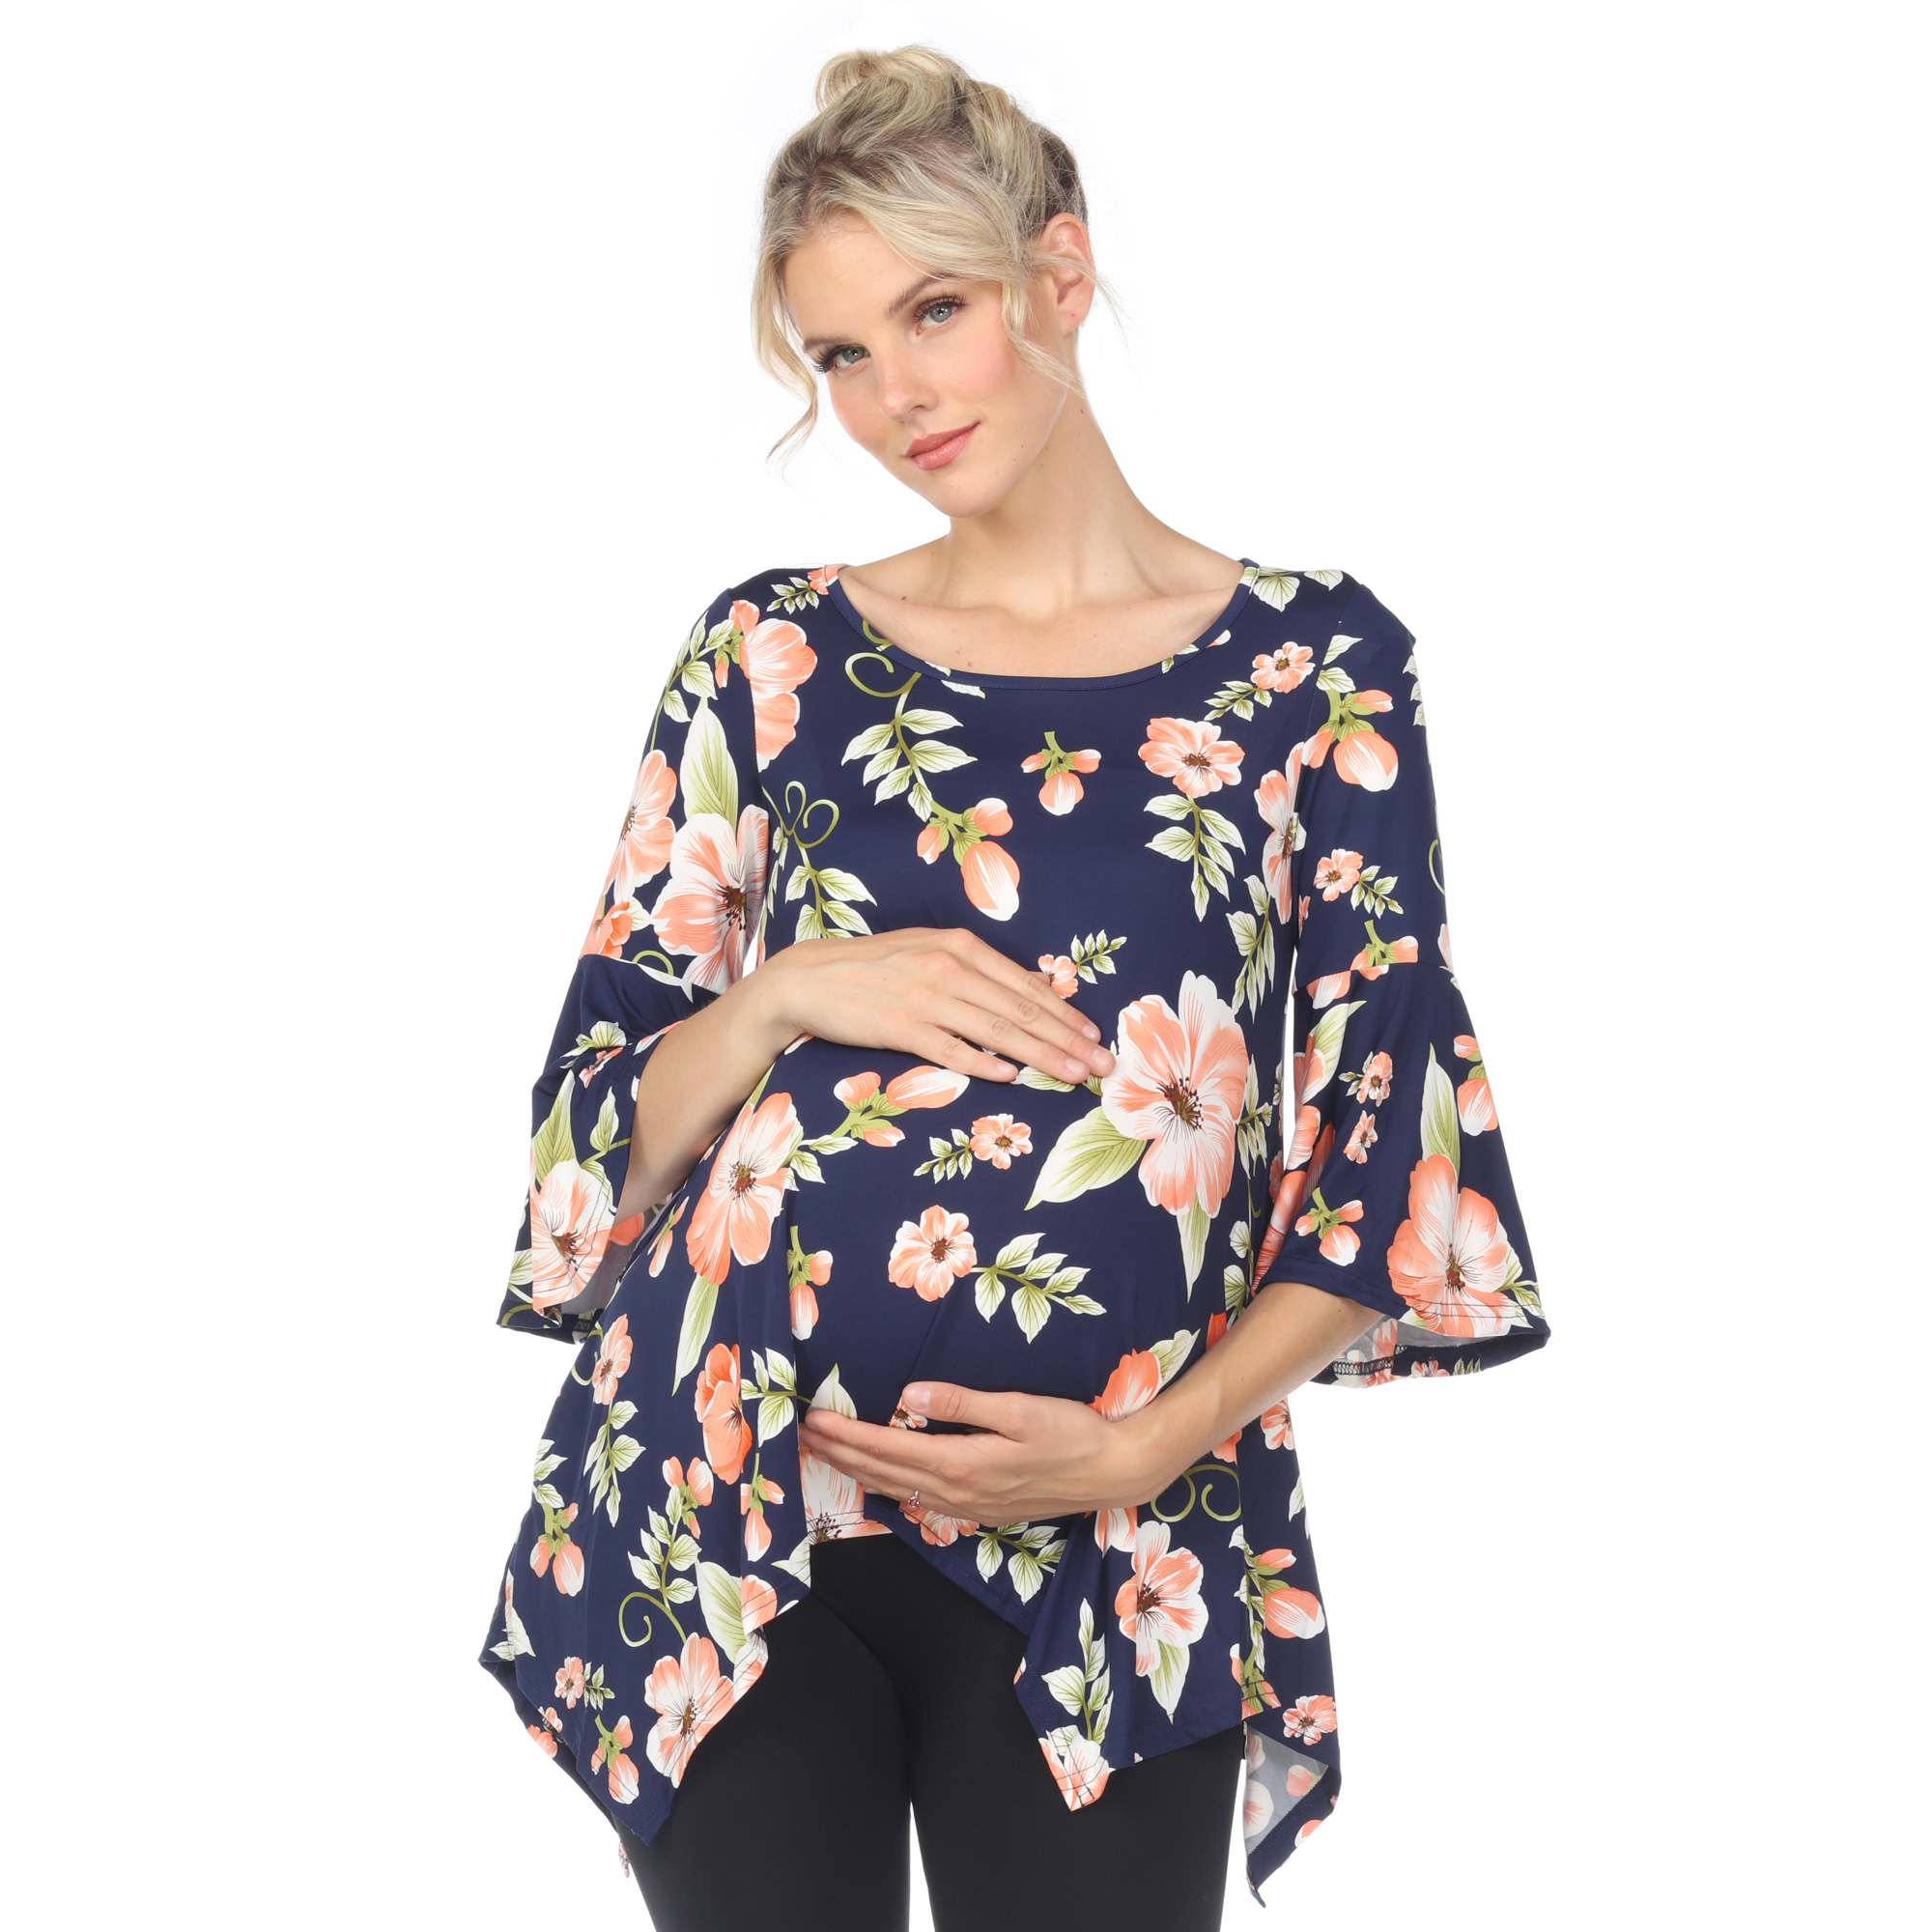 White Mark Women's Maternity Floral Print Quarter Sleeve Tunic Top With Pockets - Peach Flower, 1X